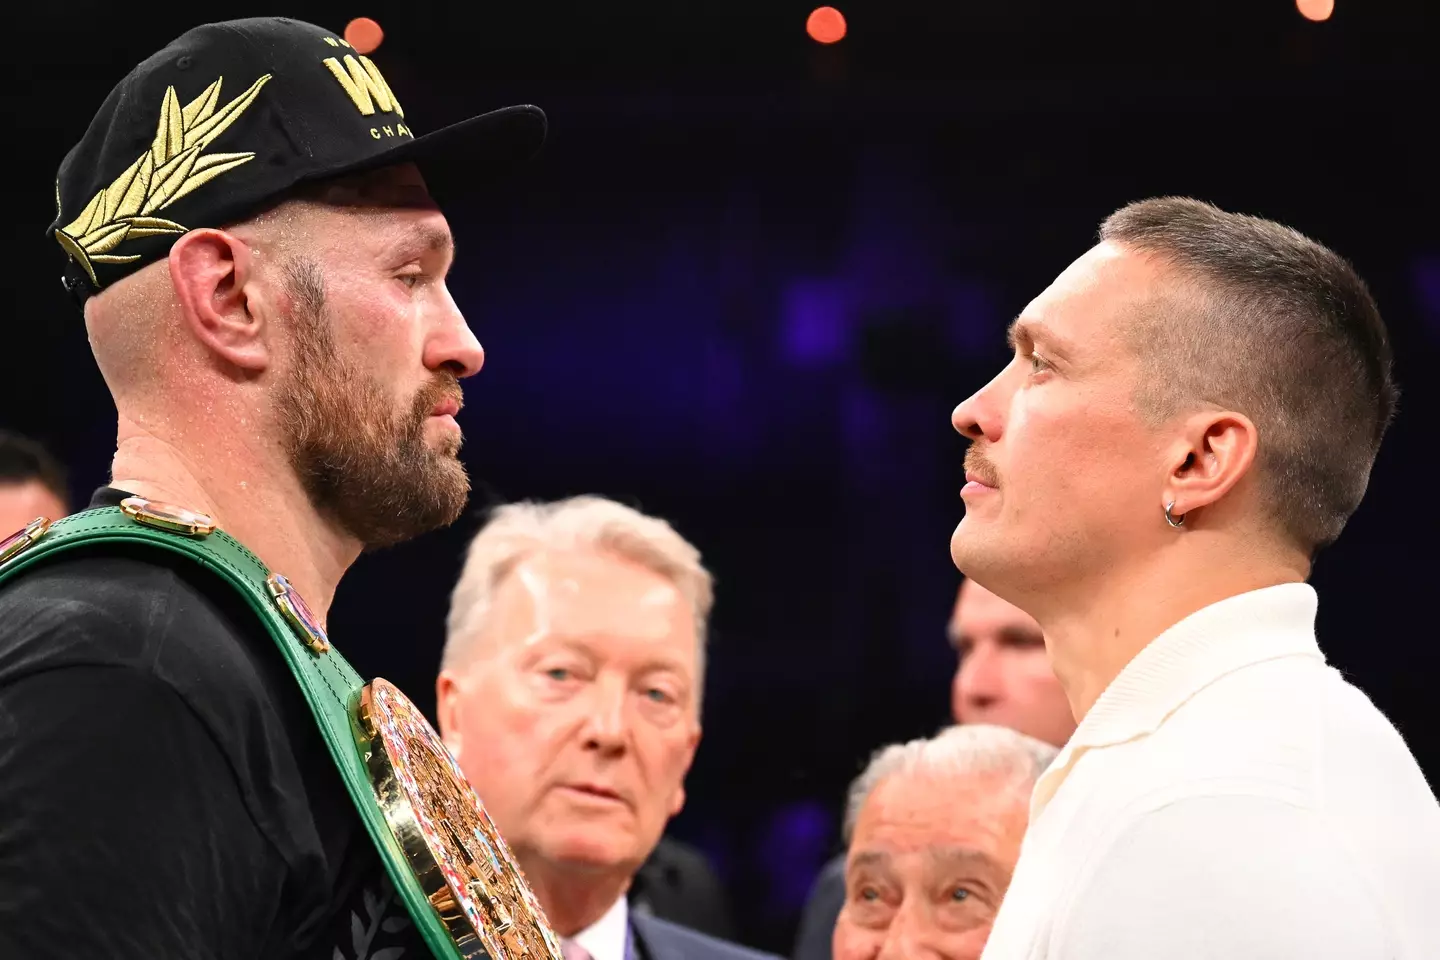 Tyson Fury's fight against Oleksandr Usyk has been postponed due to injury. (